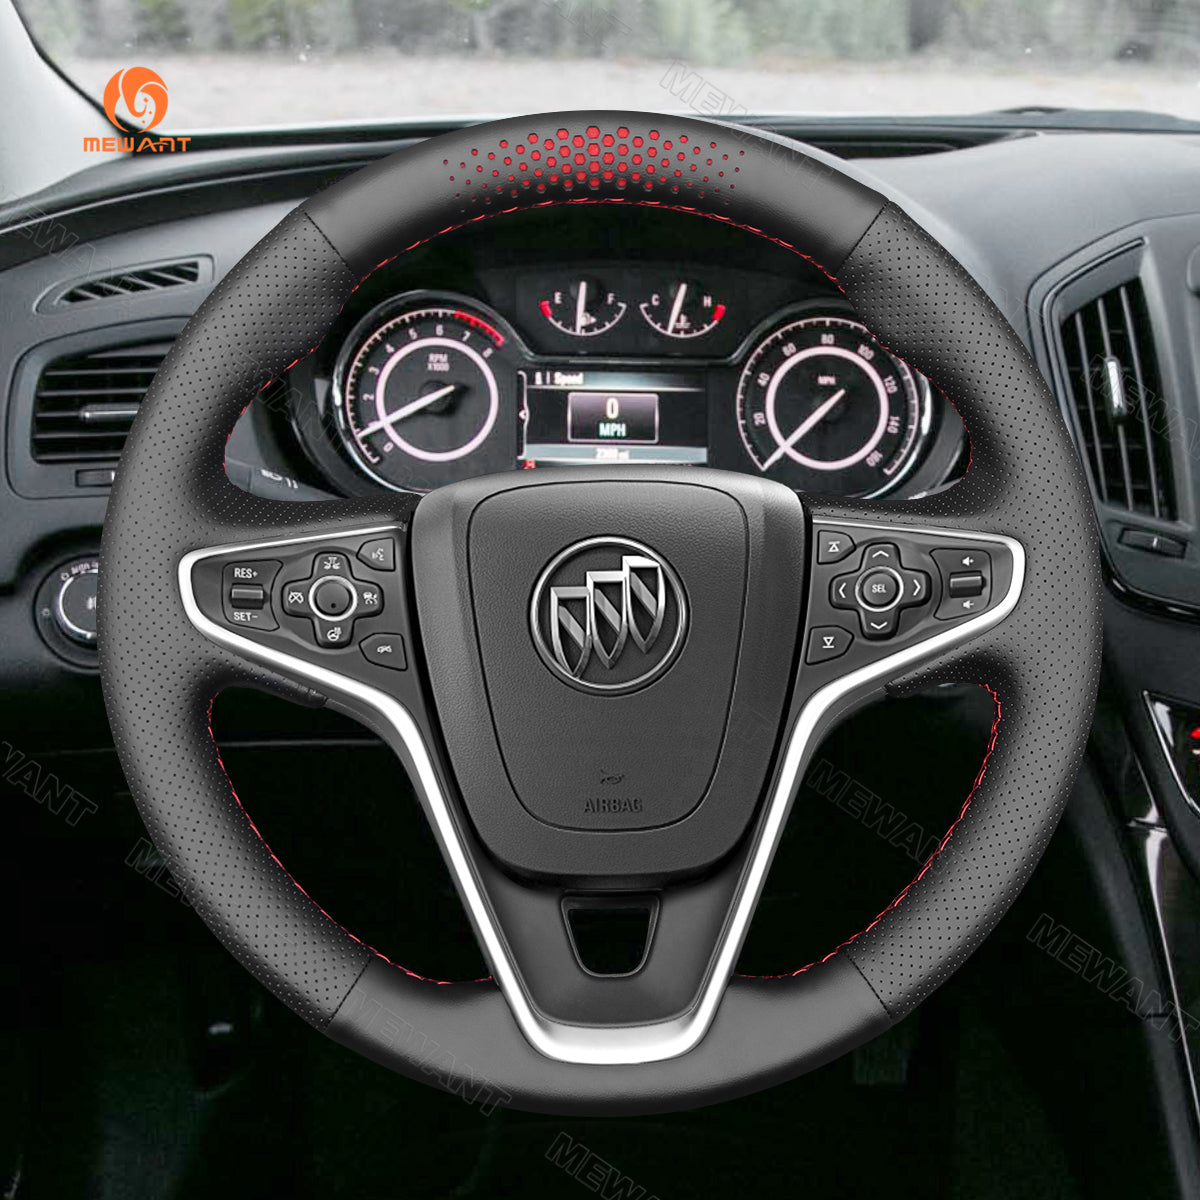 MEWANT Hand Stitch Black Leather Car Steering Wheel Cover for Opel Vauxhall Insignia Buick Regal